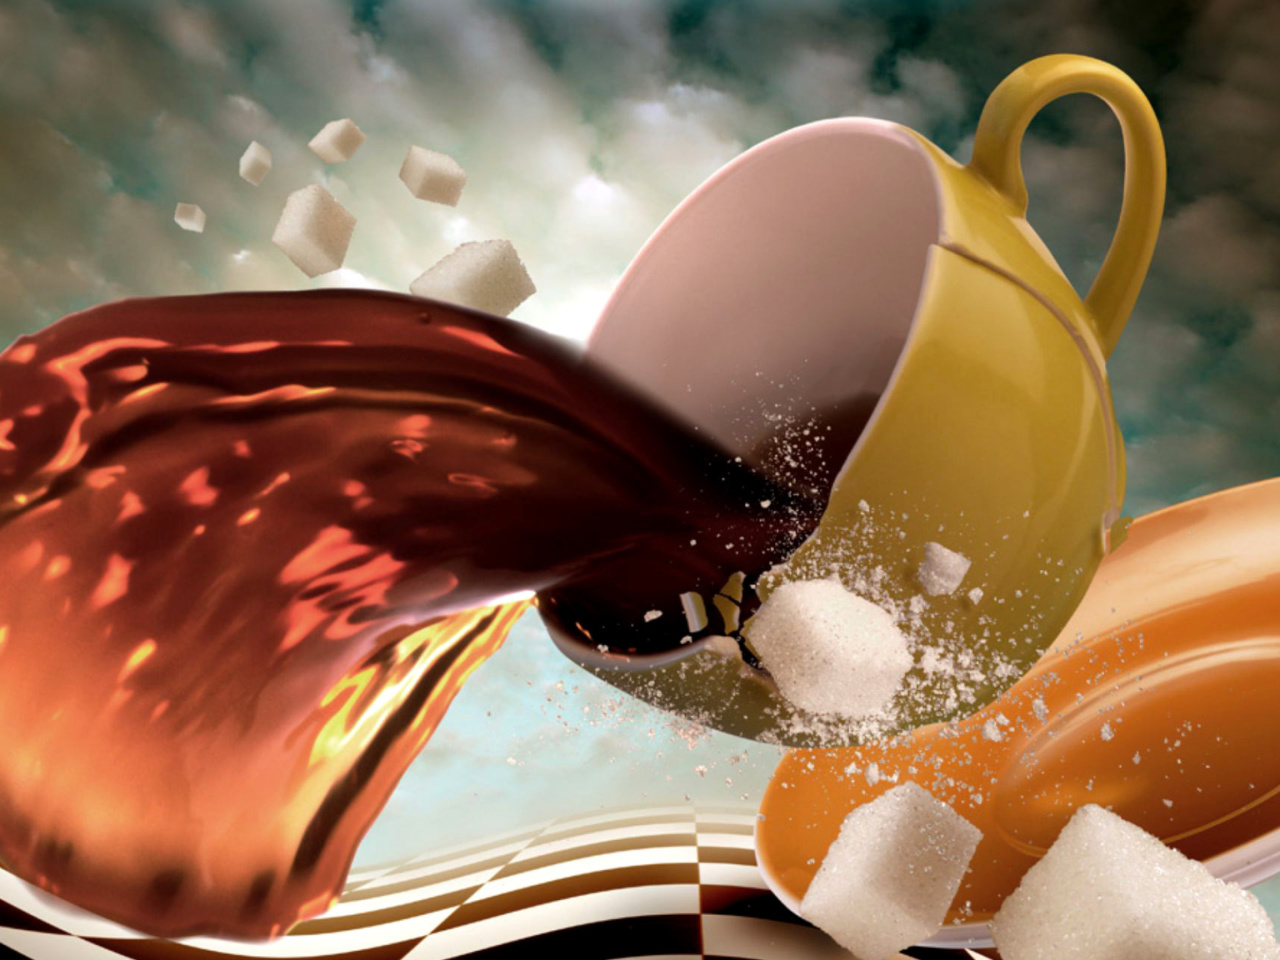 Surrealism Coffee Cup with Sugar cubes screenshot #1 1280x960